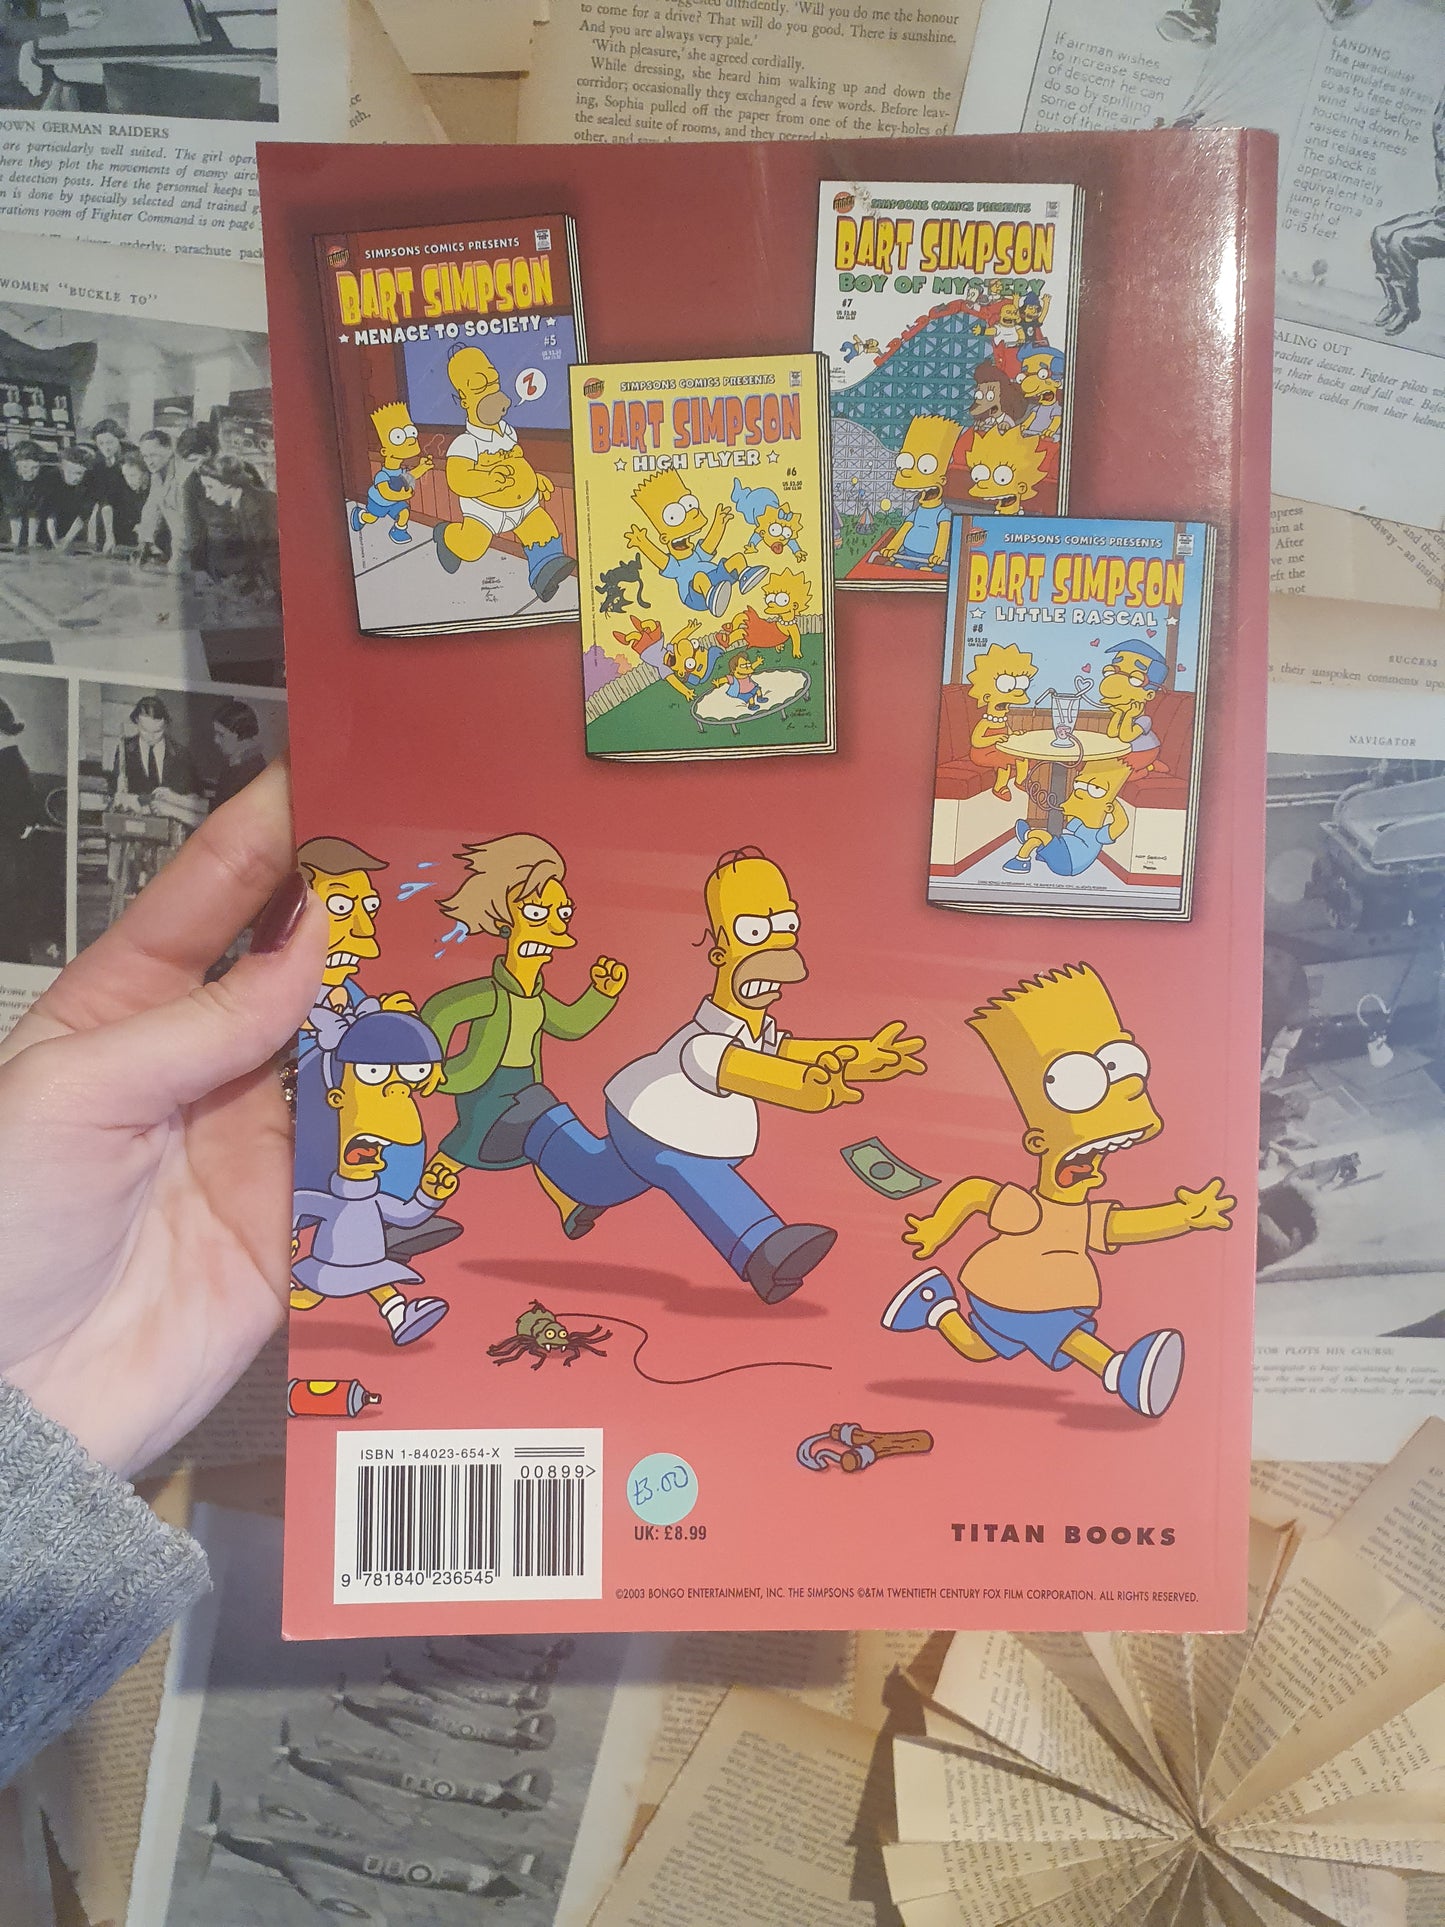 Big Bad Book of Bart Simpson by Groening (2003)